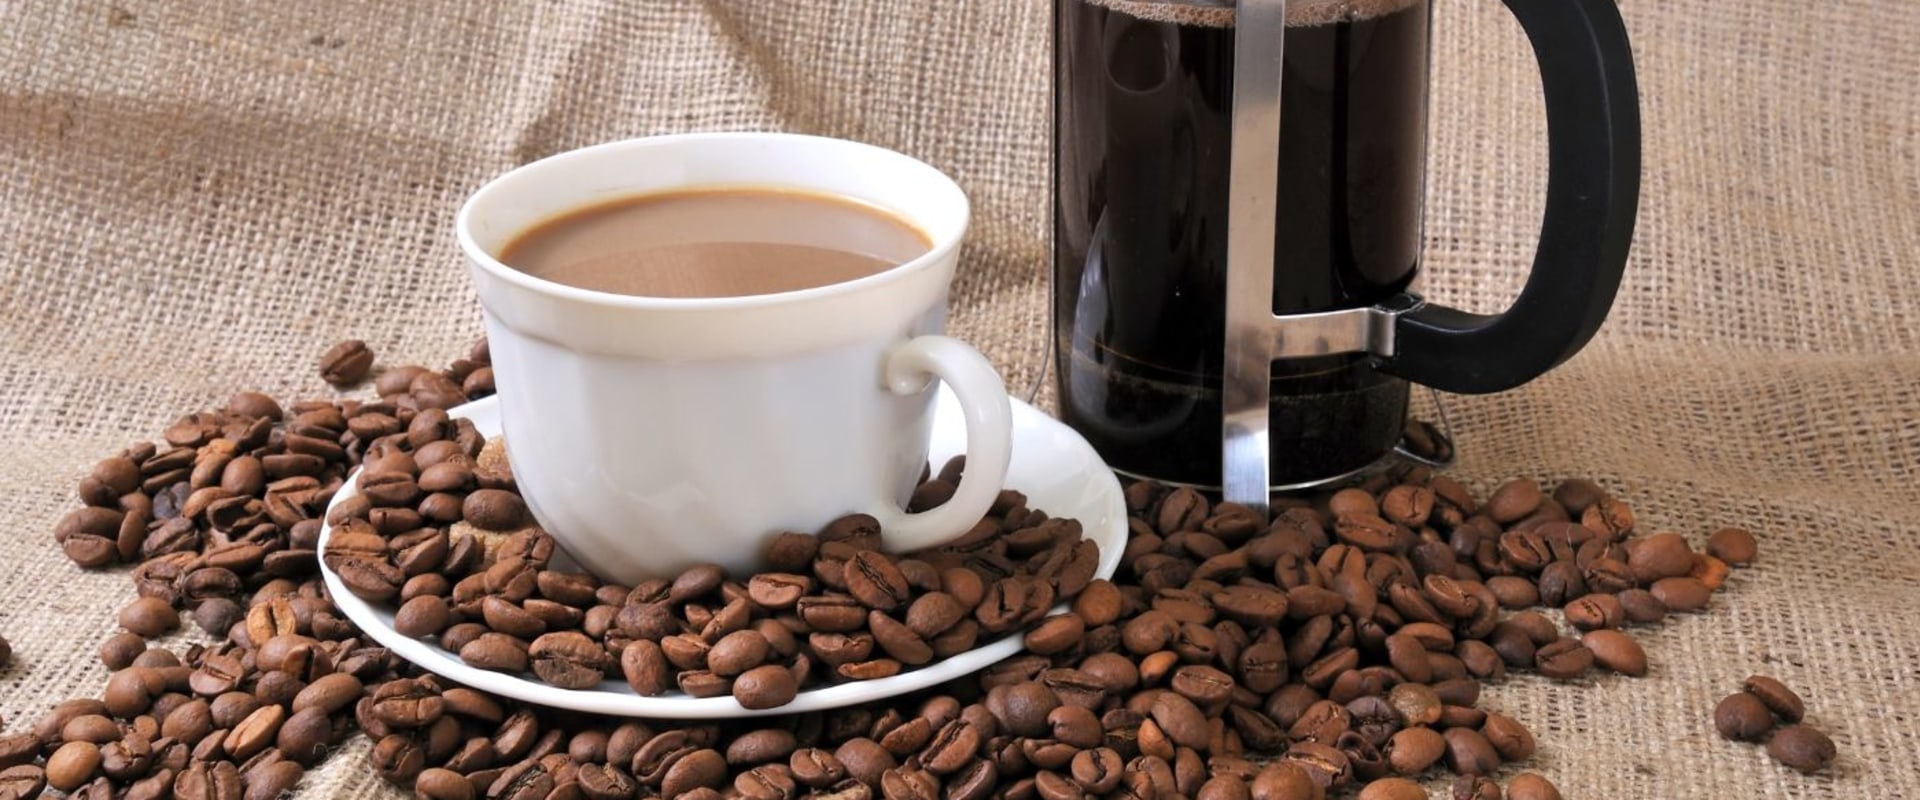 What store bought coffee is best for french press?